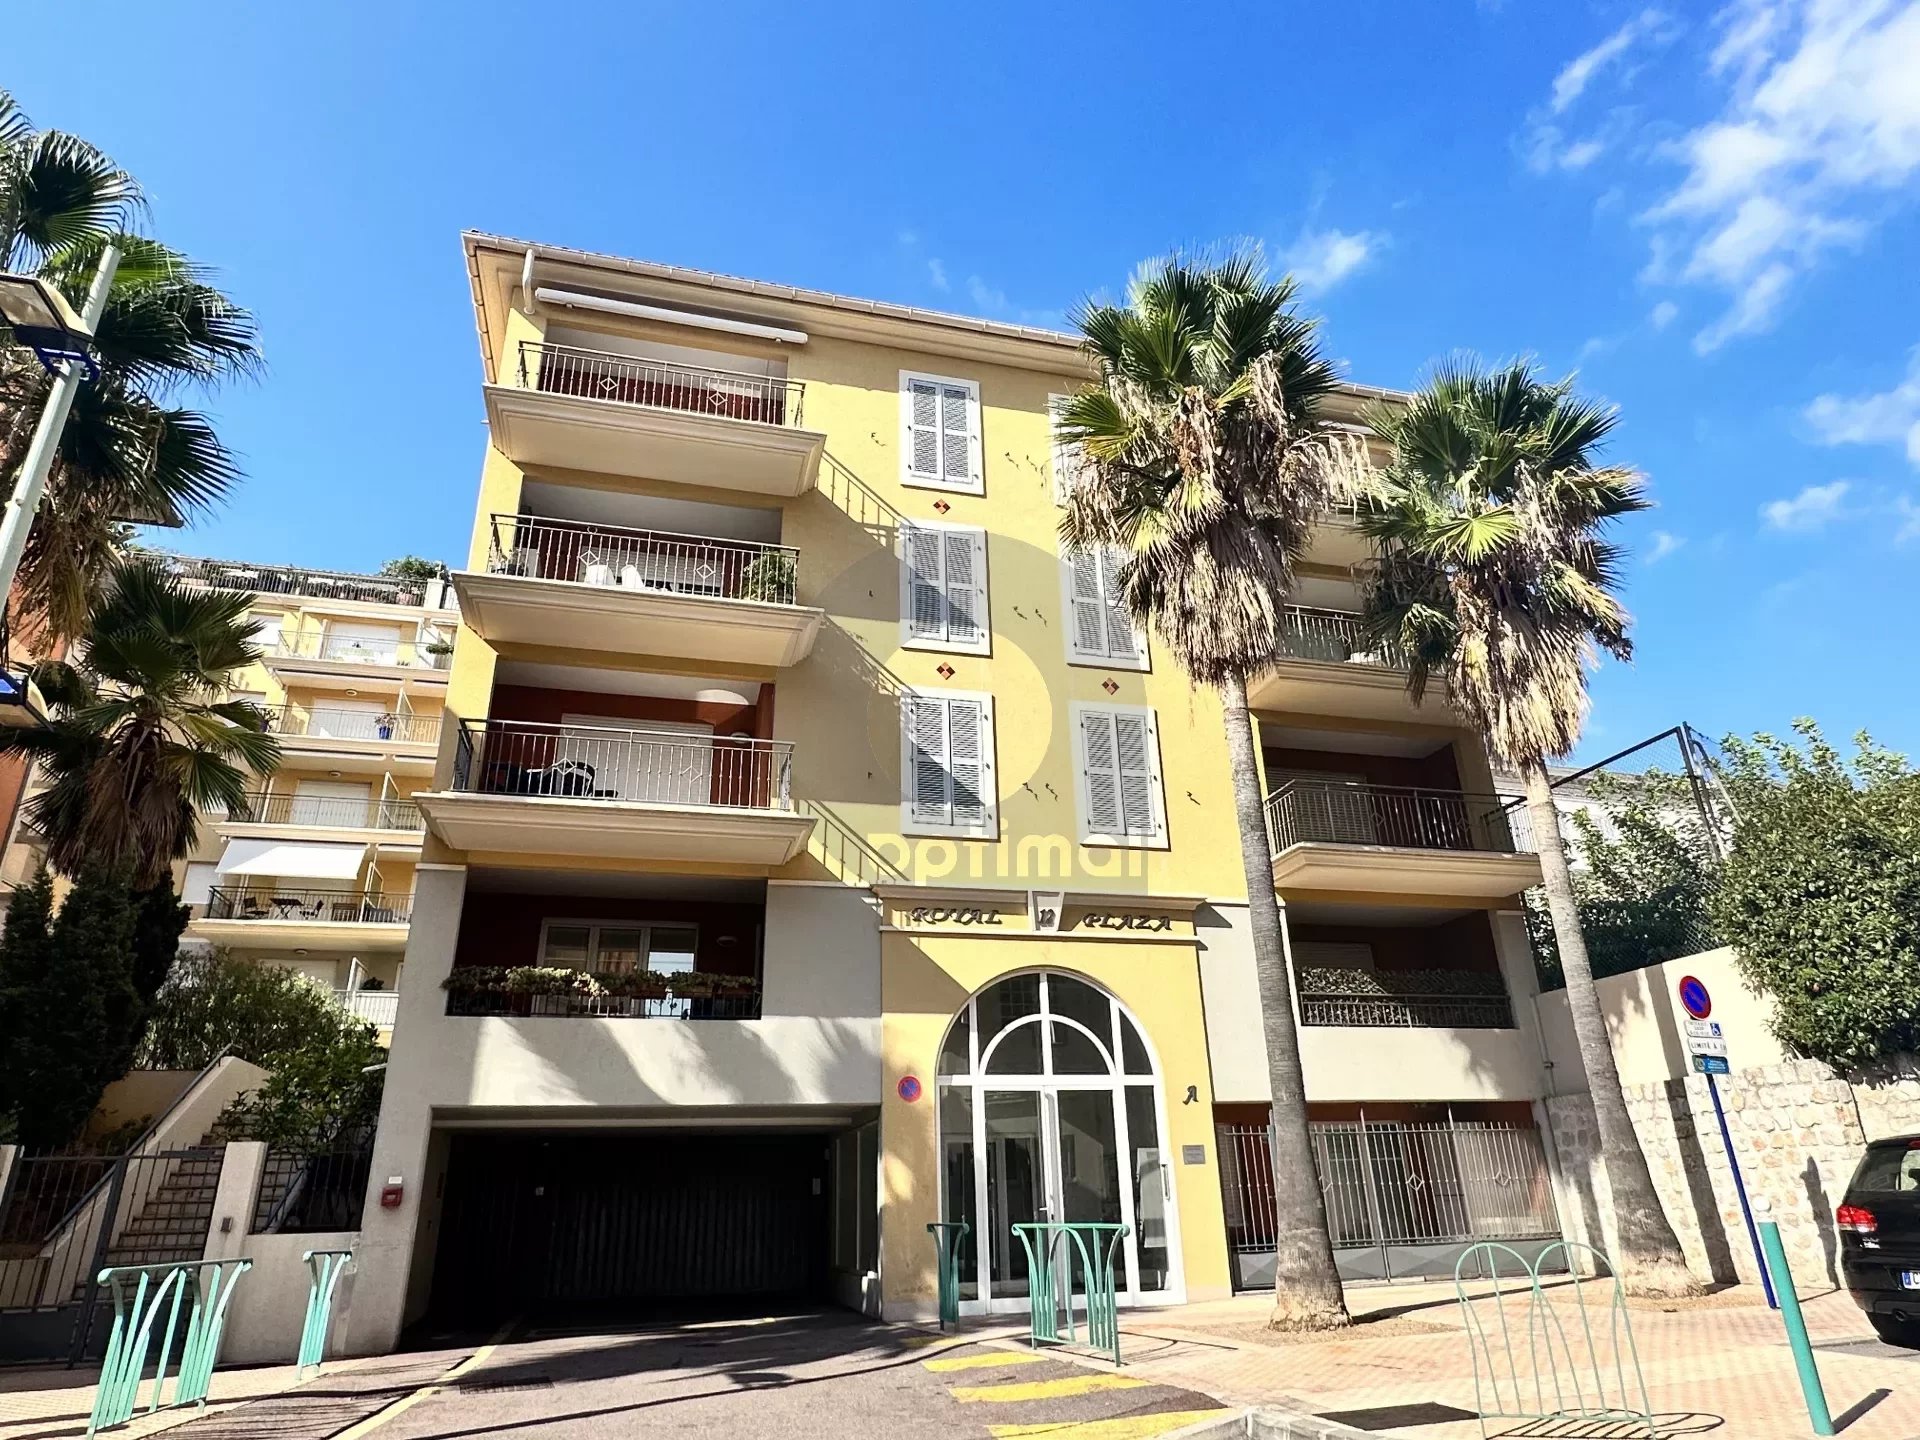 CENTER OF MENTON - 2-ROOM APARTMENT WITH TERRACE